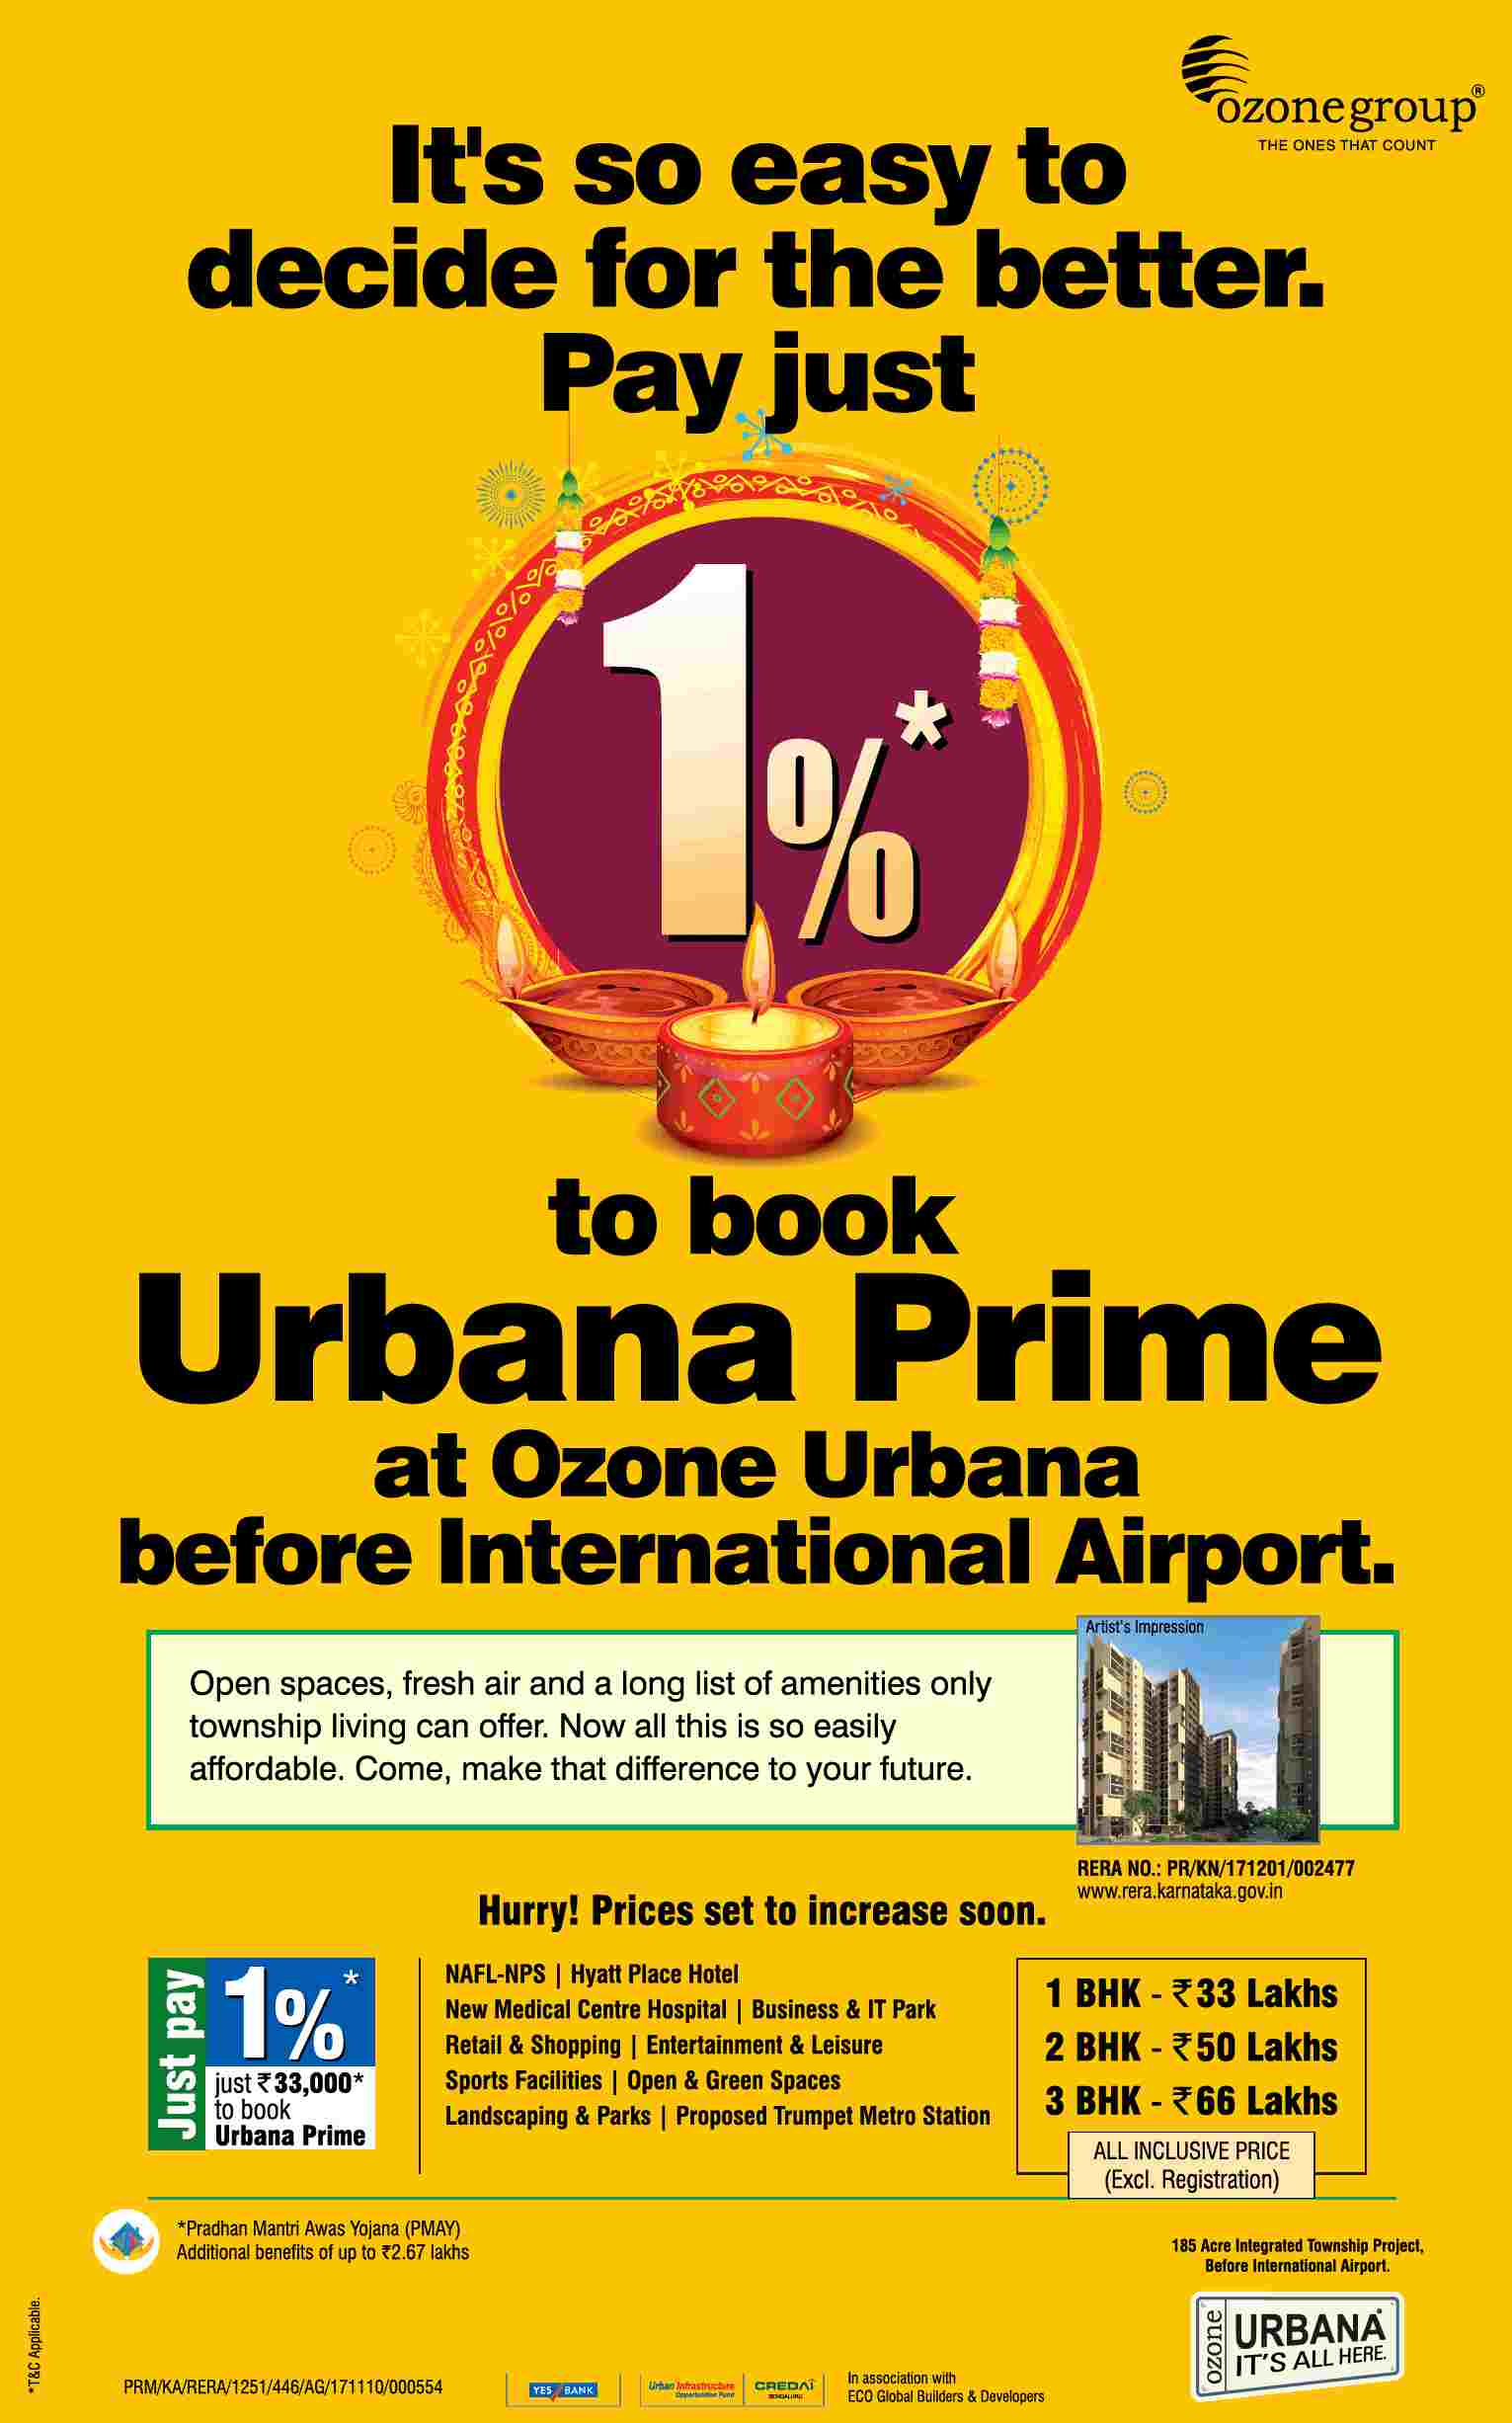 Just pay 1% to book your home at Ozone Urbana Prime in Devanahalli, Bangalore Update